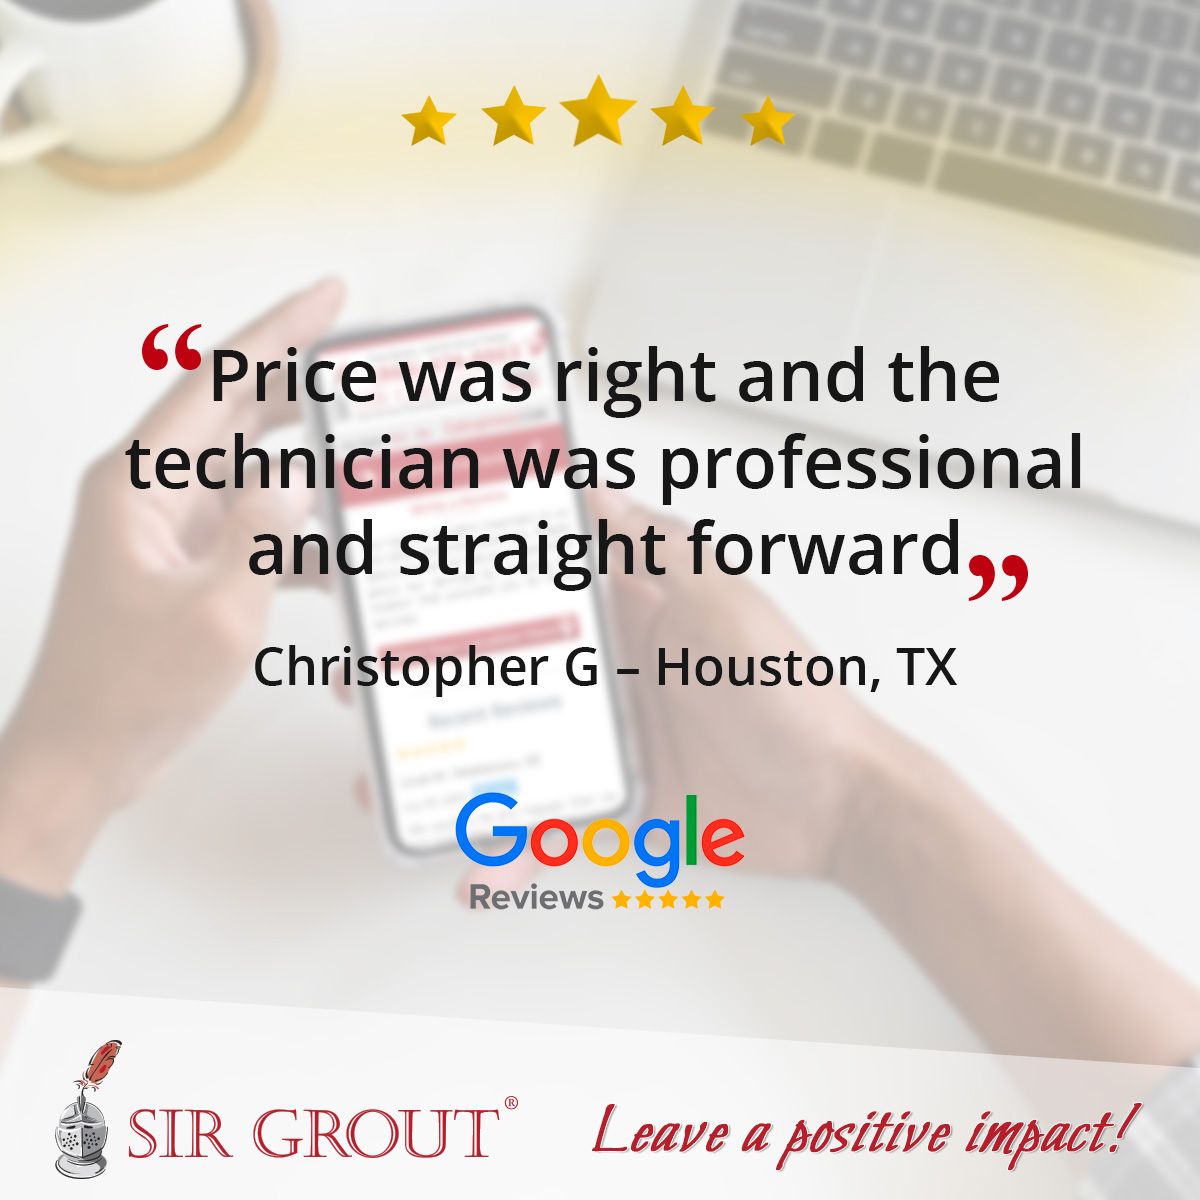 Price was right and the technician was professional and straight forward.